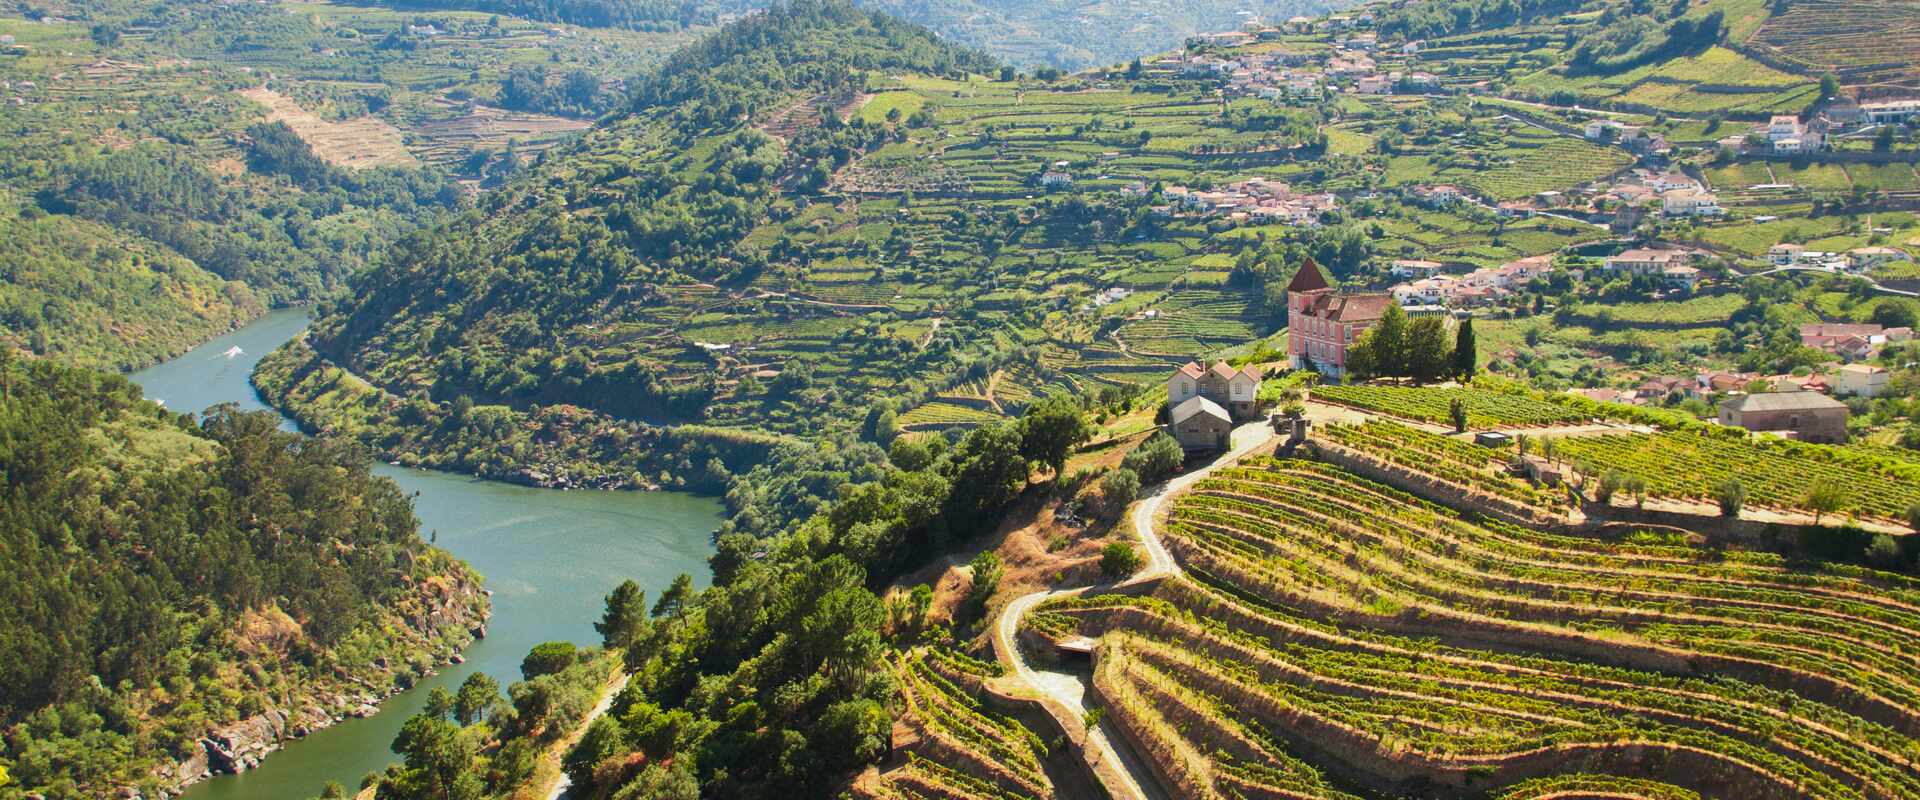 Sweeping views of the vineyards leading down to the Douro valley